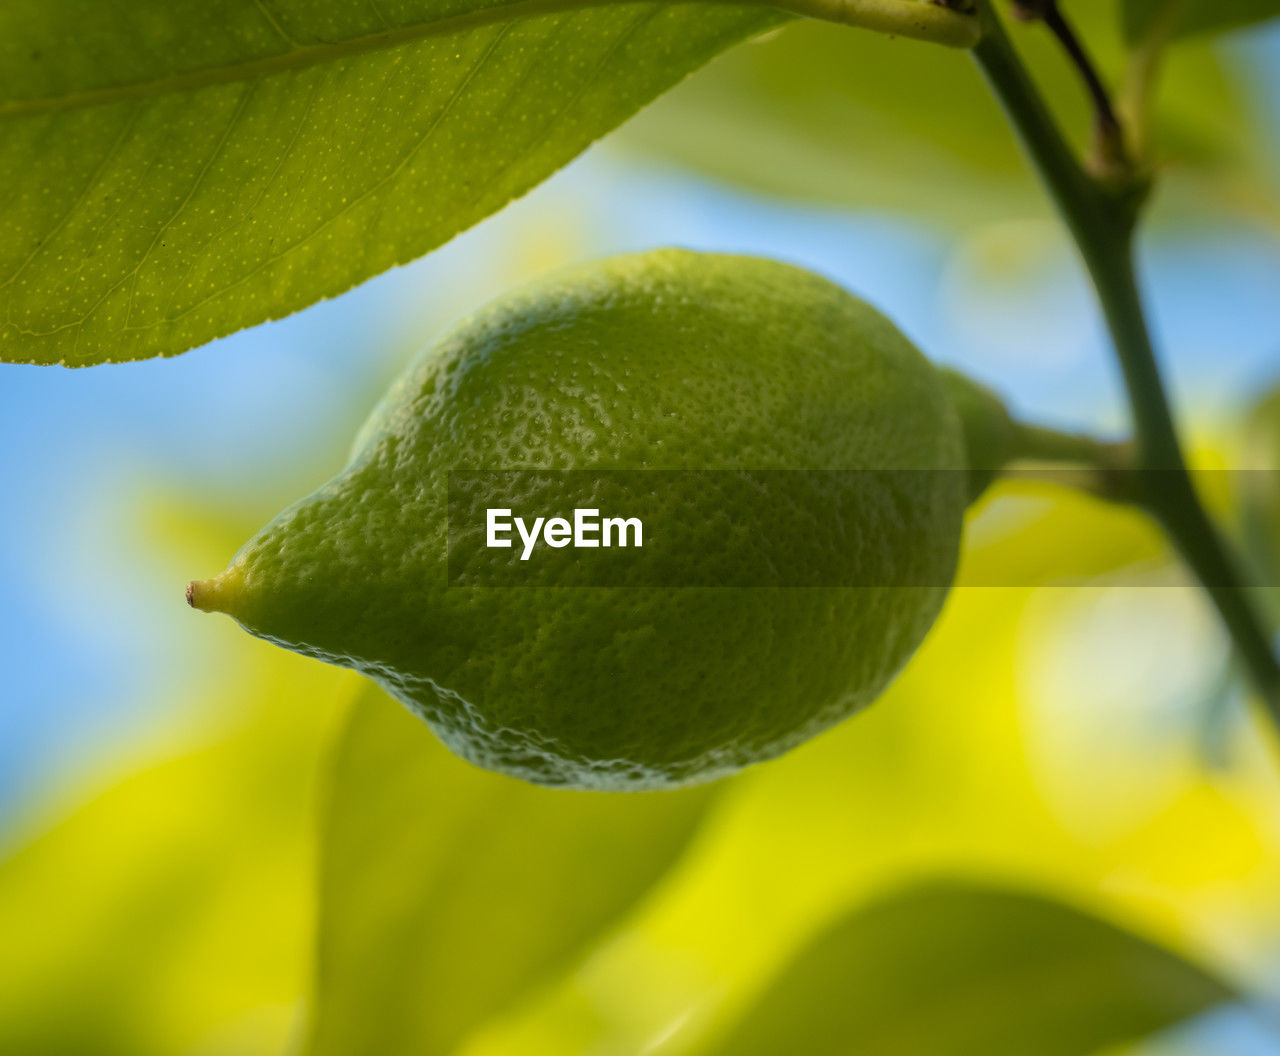 green, fruit, plant, food, yellow, food and drink, healthy eating, citrus, leaf, freshness, plant part, tree, close-up, macro photography, nature, growth, citrus fruit, lemon, no people, lemon tree, flower, produce, lime, fruit tree, focus on foreground, wellbeing, outdoors, citron, branch, sunlight, day, agriculture, beauty in nature